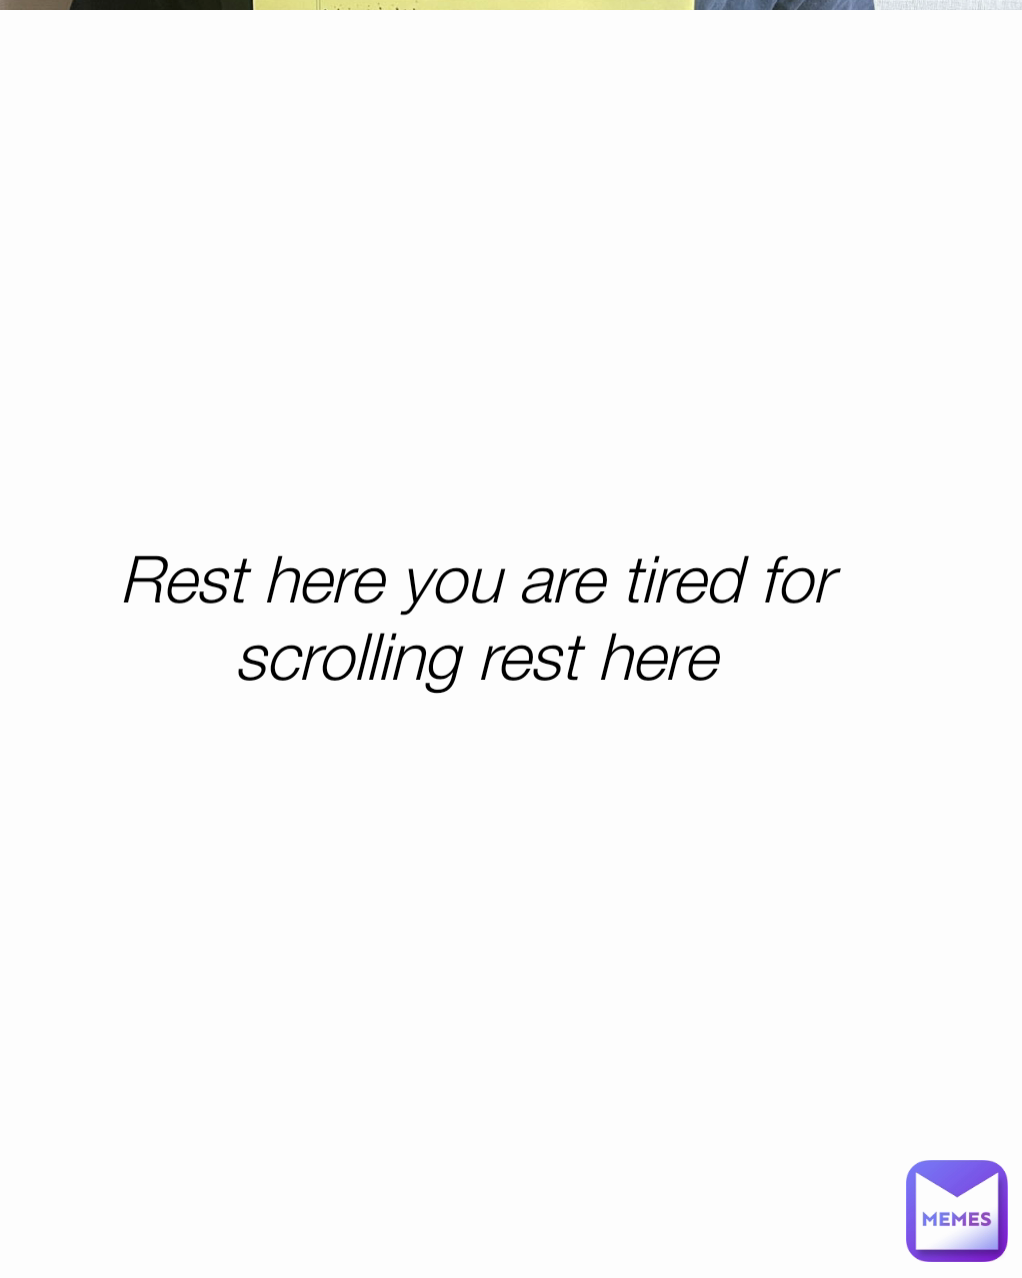 Rest here you are tired for scrolling rest here